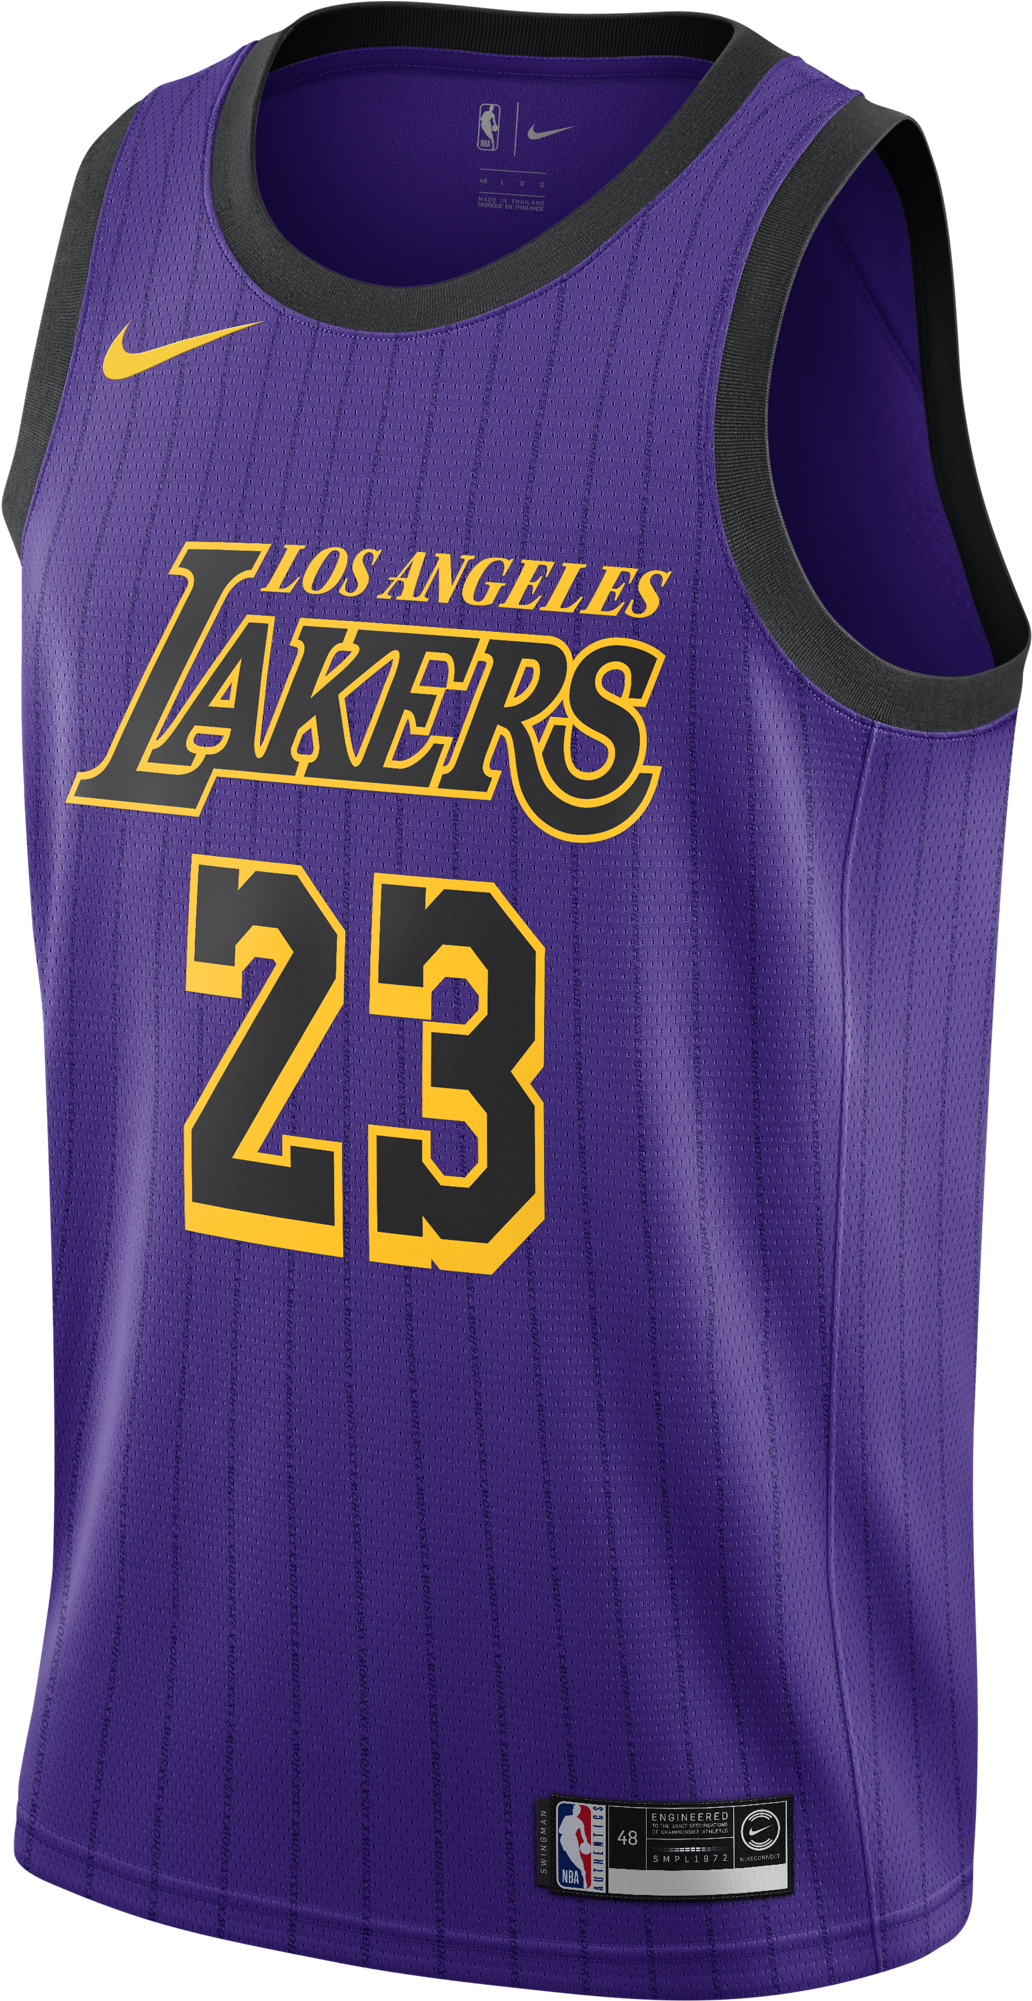 Los Angeles Lakers Jersey Number23 PNG